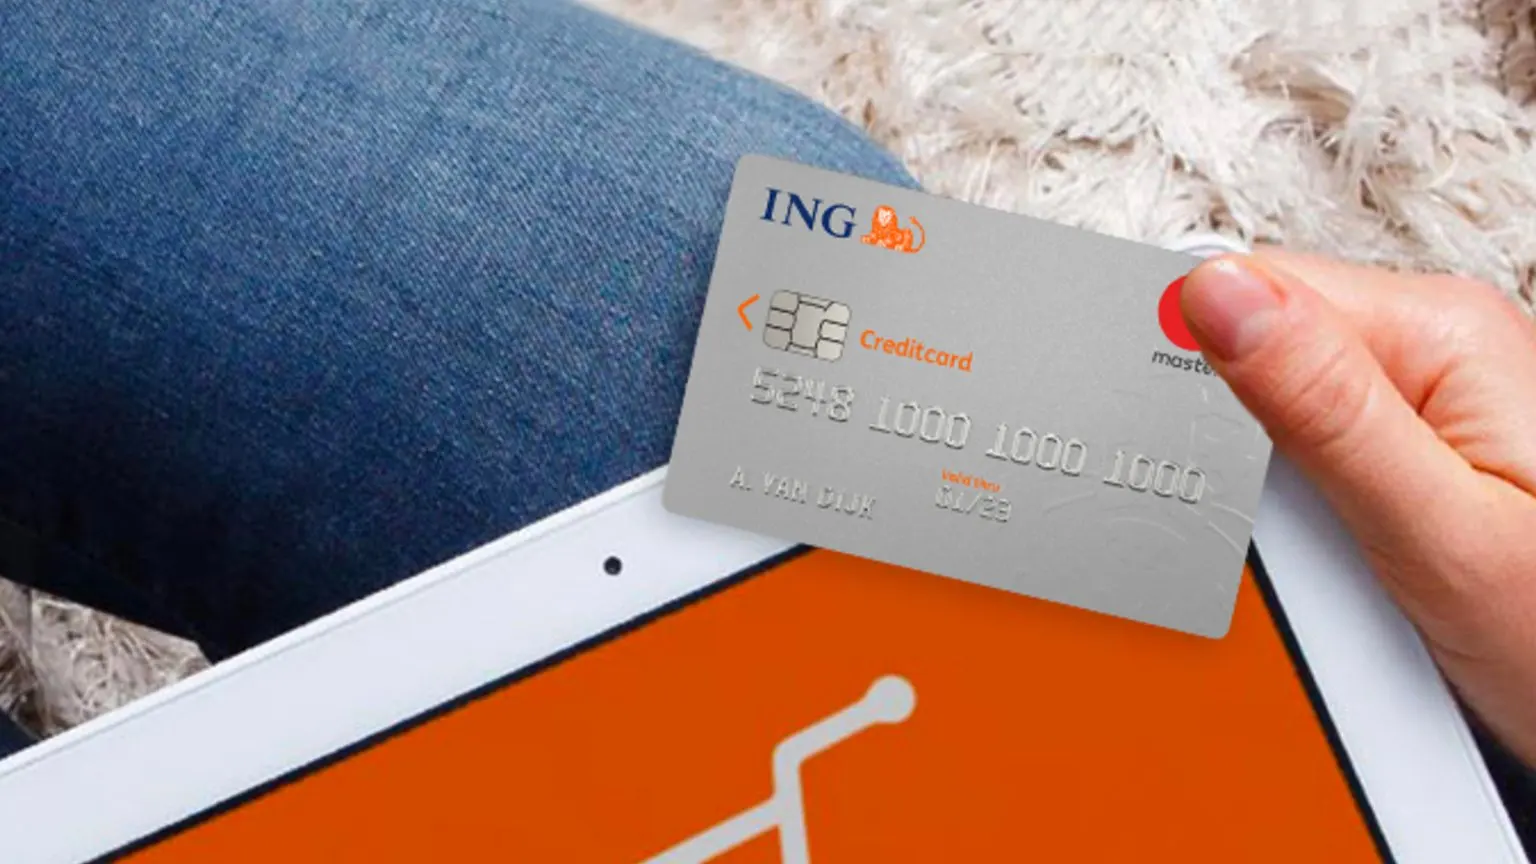 ing-bank-accounts-compare-and-find-the-right-one-for-you-finder-nl